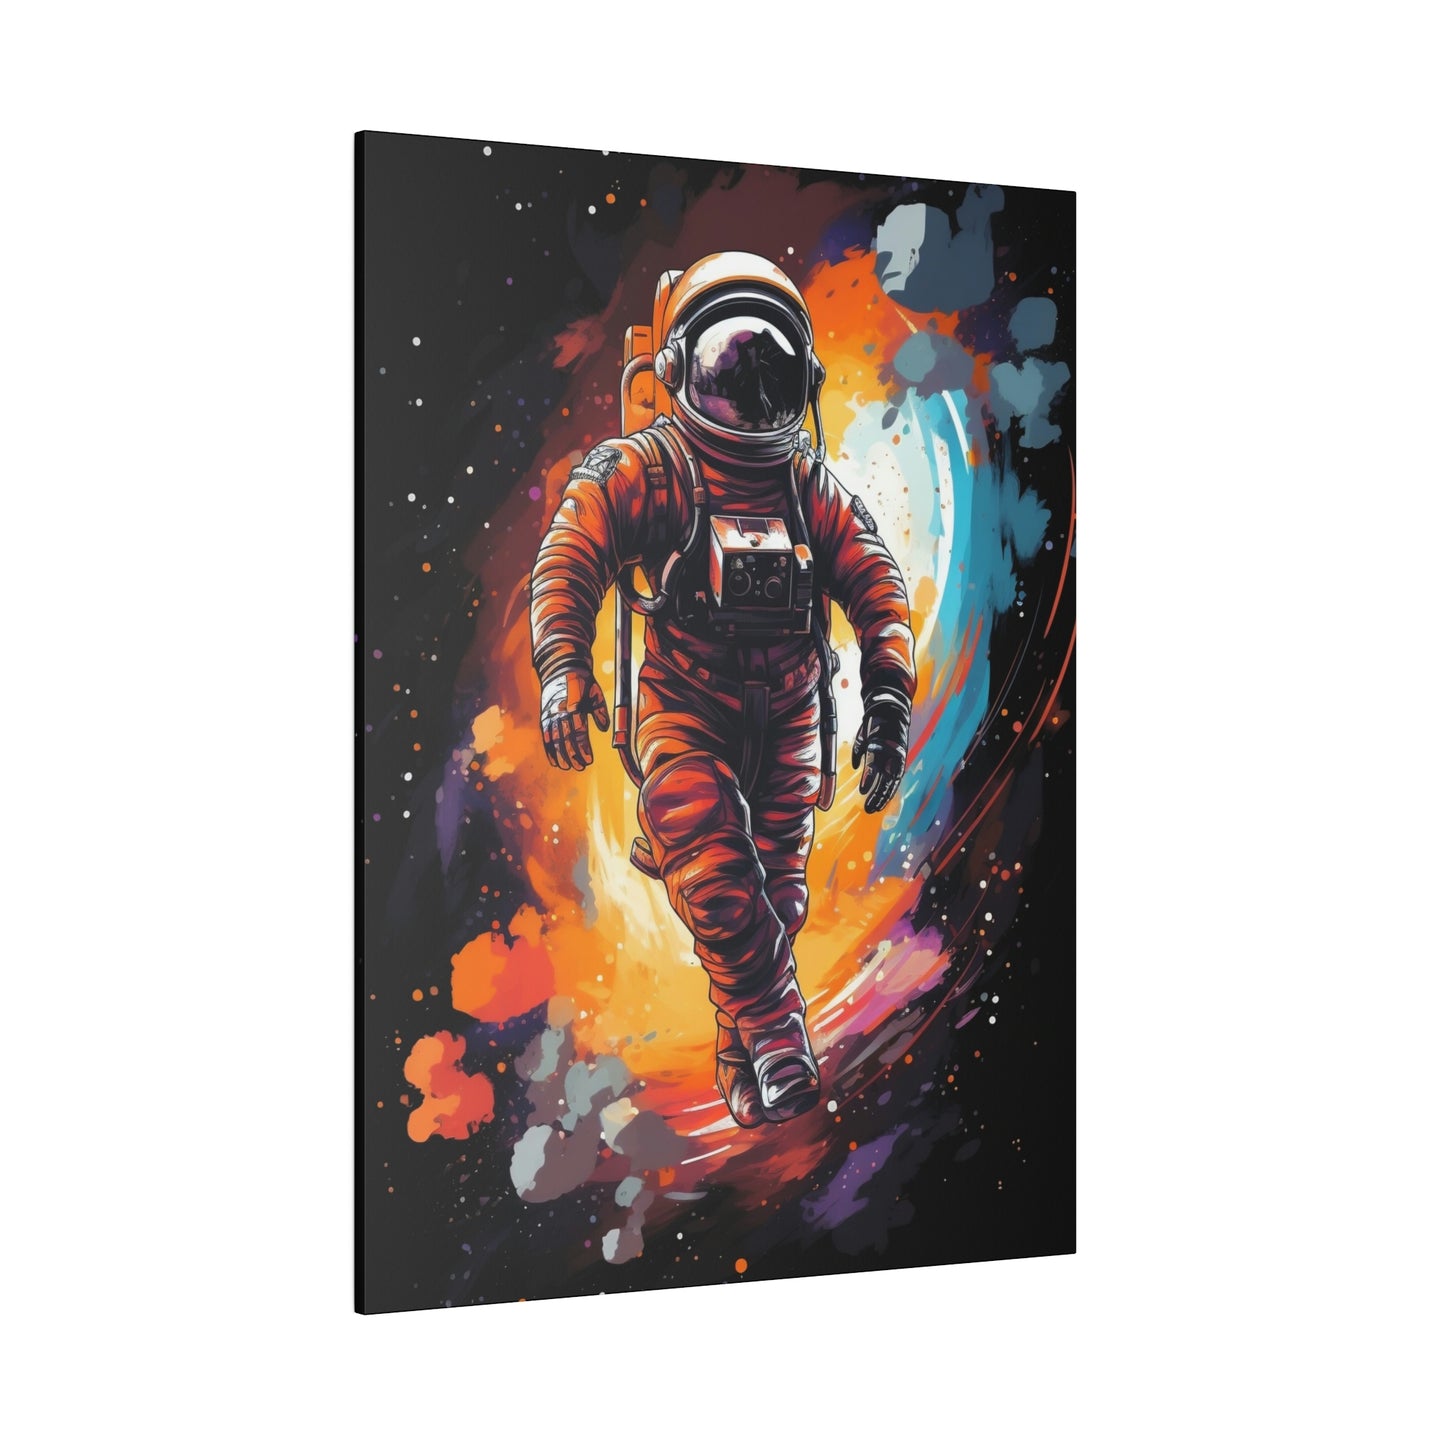 Transcend Reality with "Spaced Out Astronaut" Psychedelic Wall Art - Explore the Cosmic Depths of Artistic Wonder